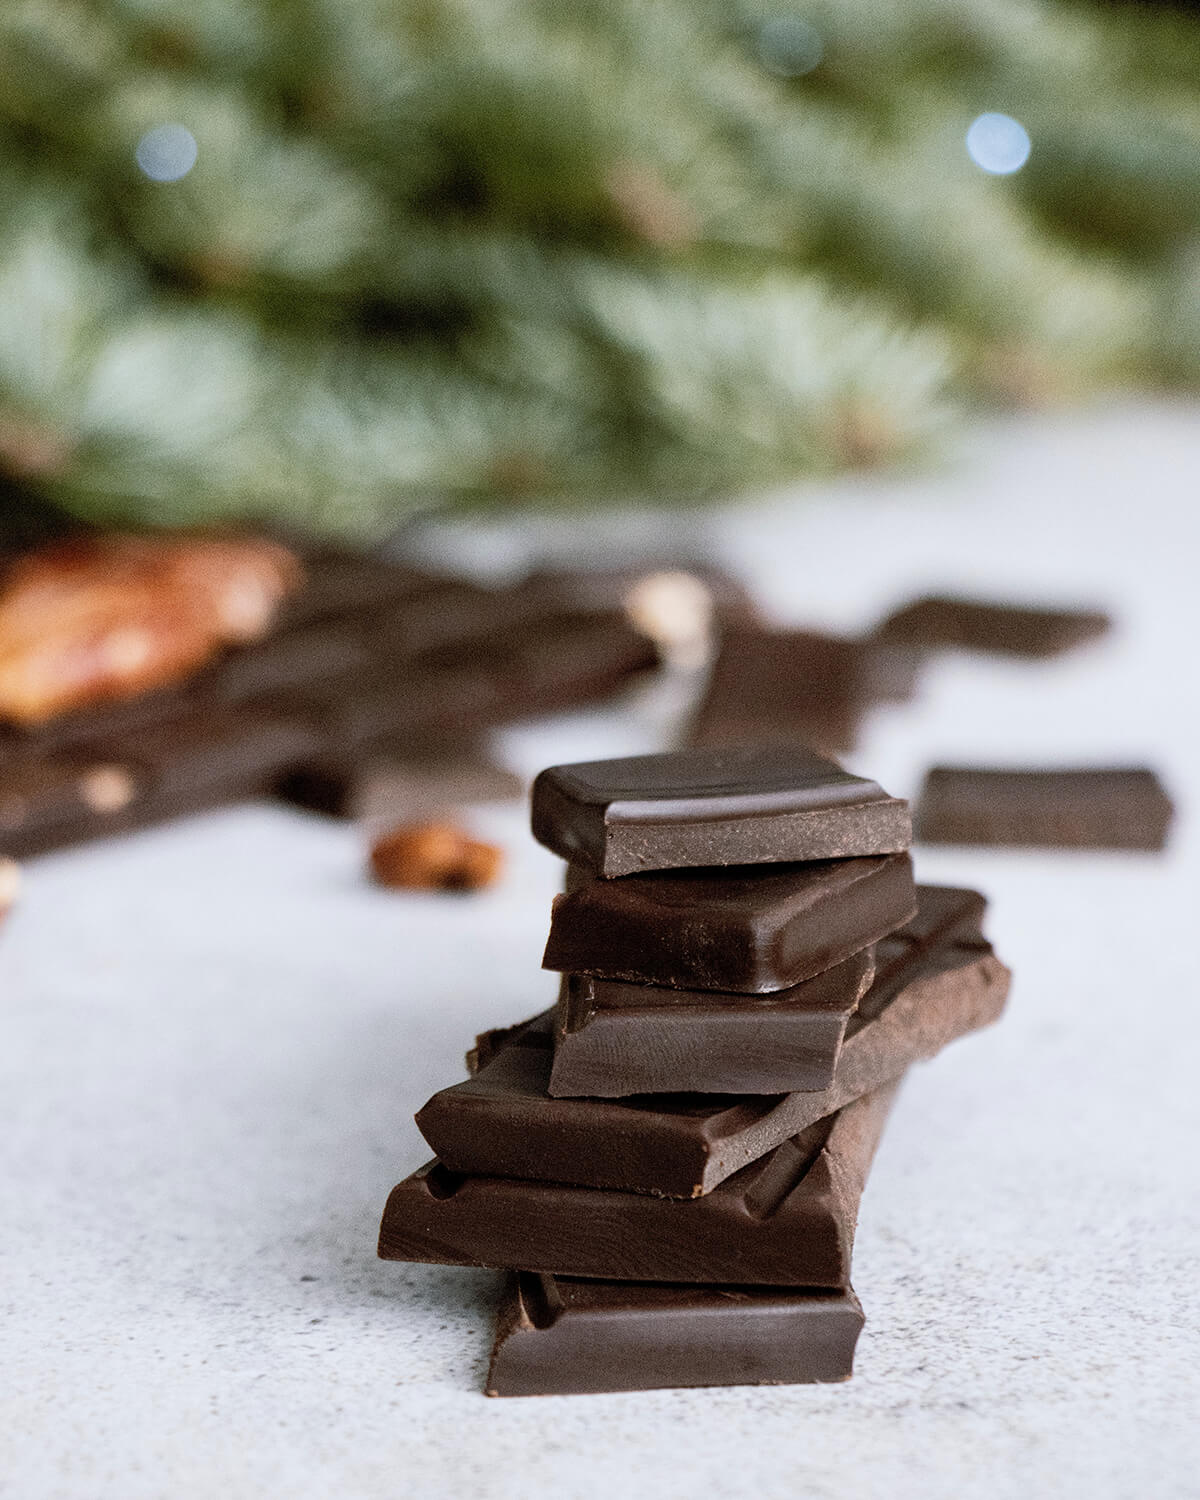 If your go-to is Dark Chocolate, you have a firm personality – someone who always stands up for what they believe in and isn’t afraid of a challenge.